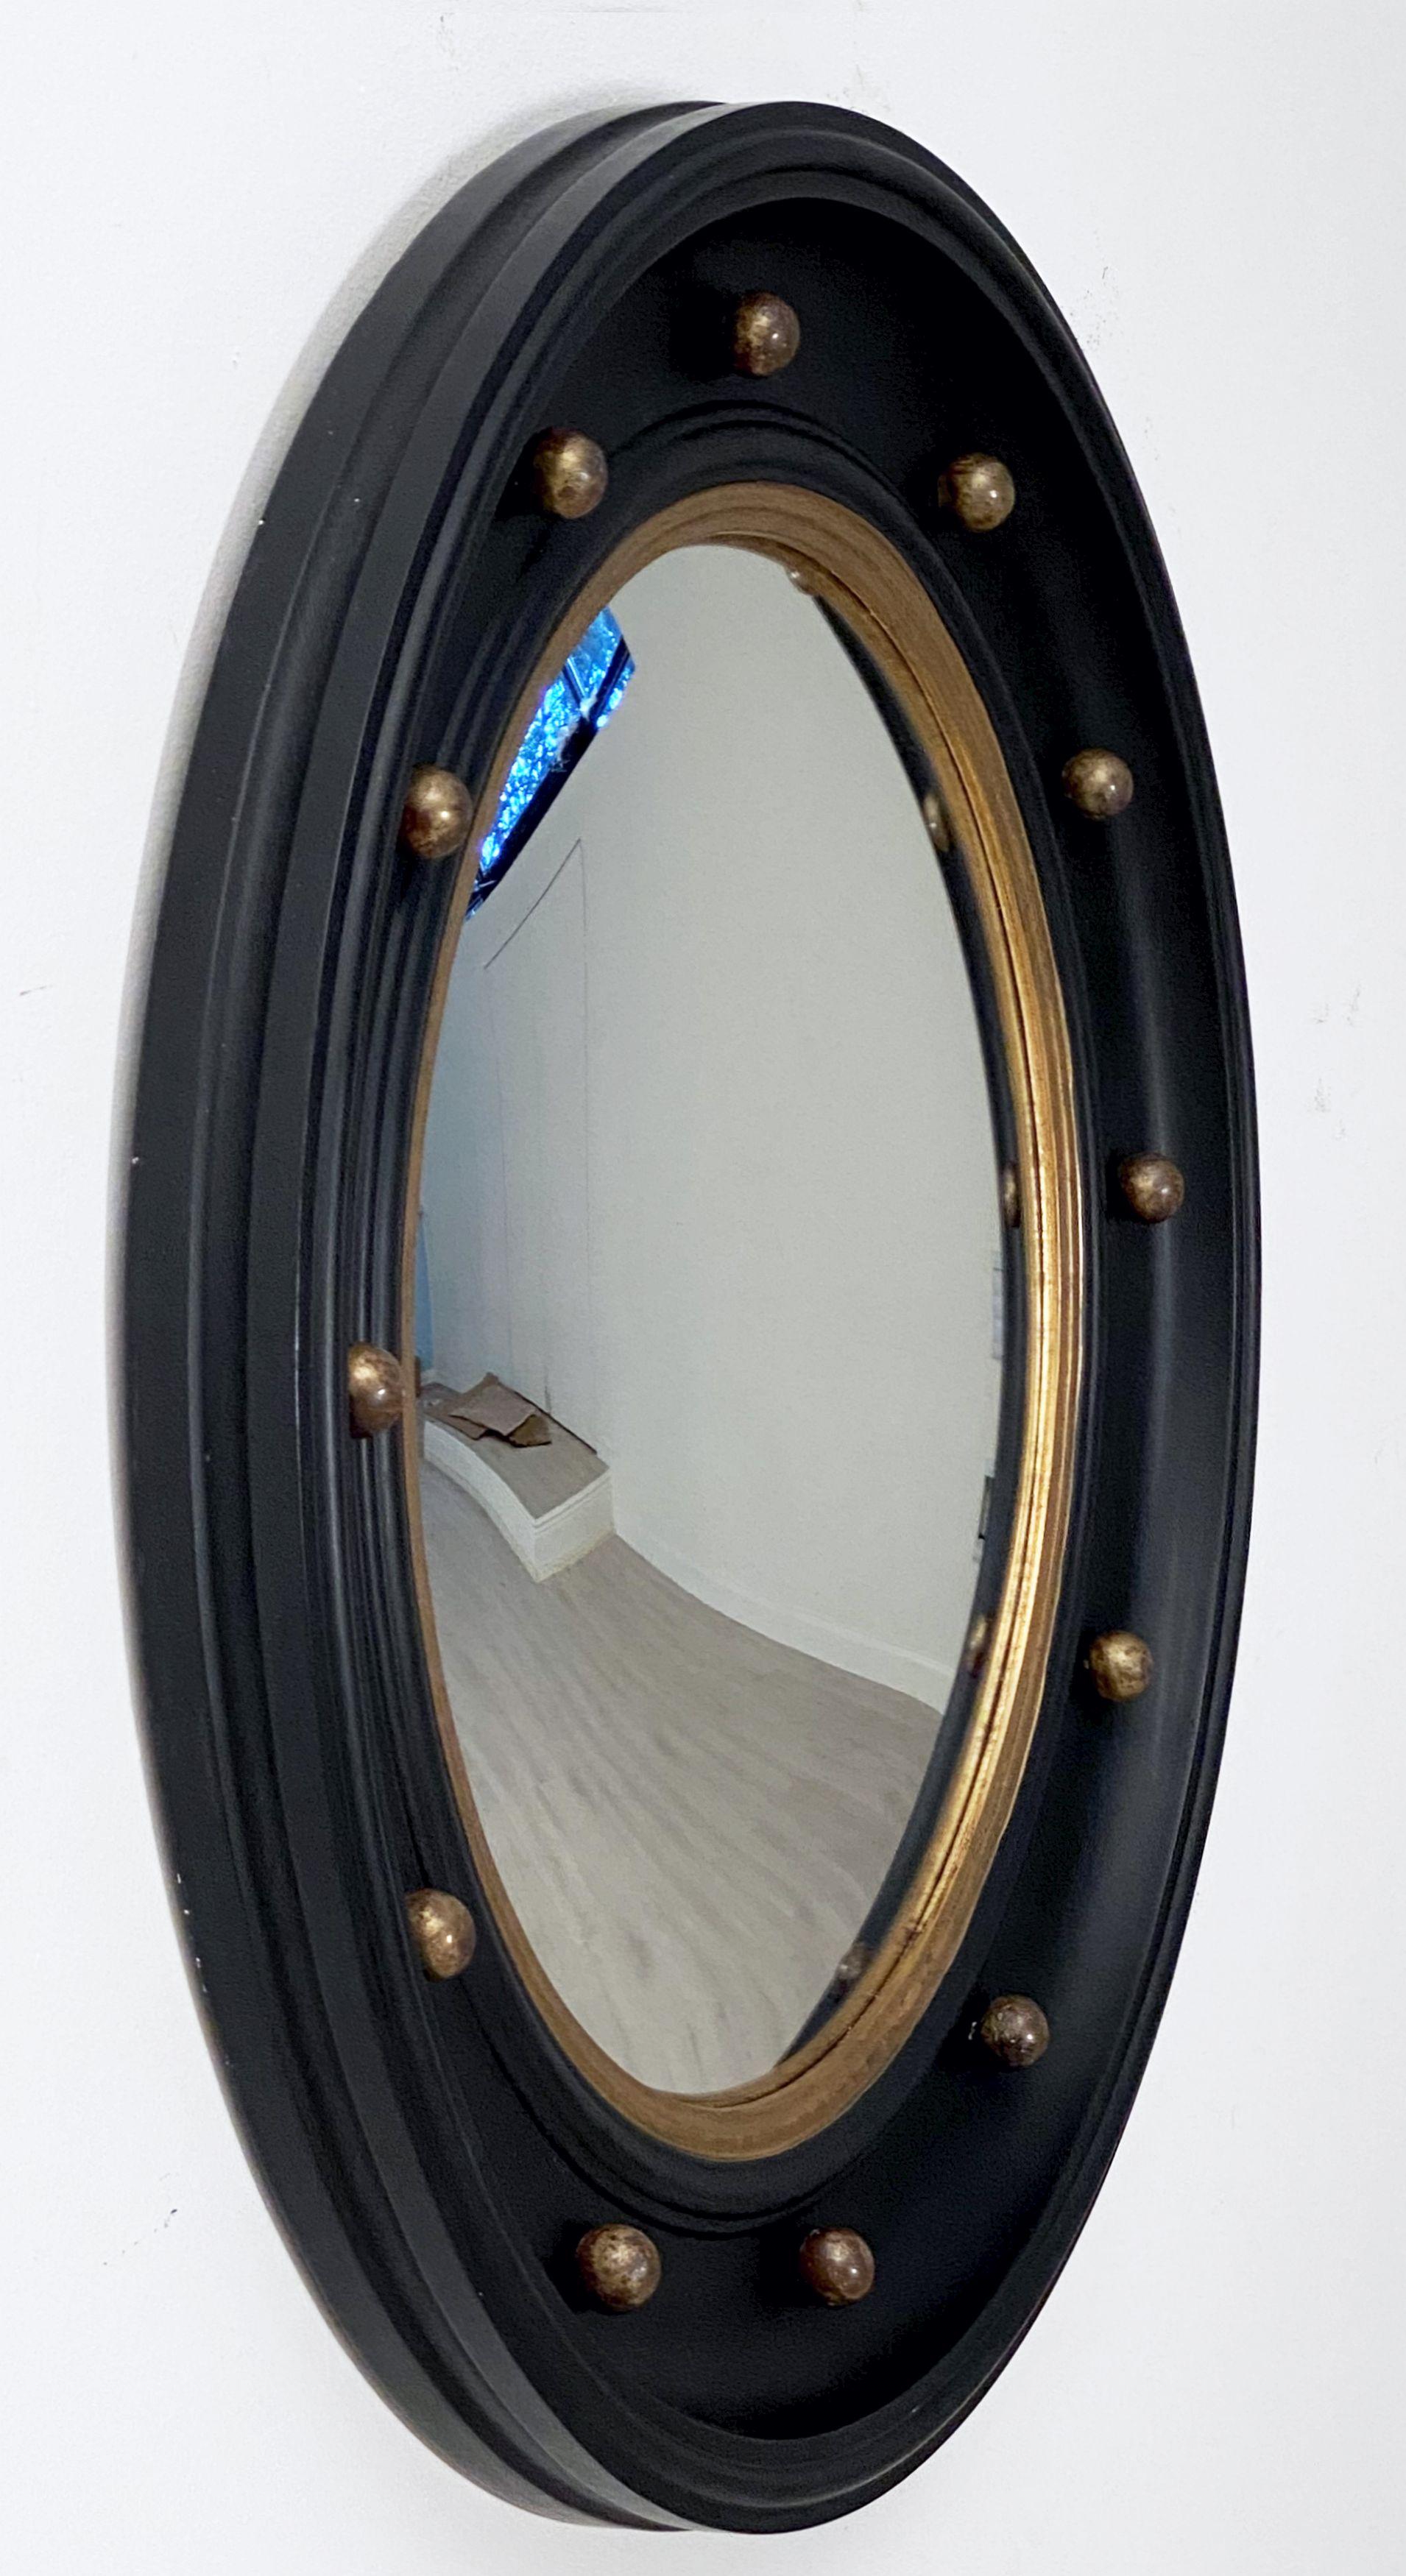 A fine very large English round or circular convex mirror featuring a Regency design of a molded, ebonized frame with gilt balls around the circumference.

Measures: Diameter is 29 inches